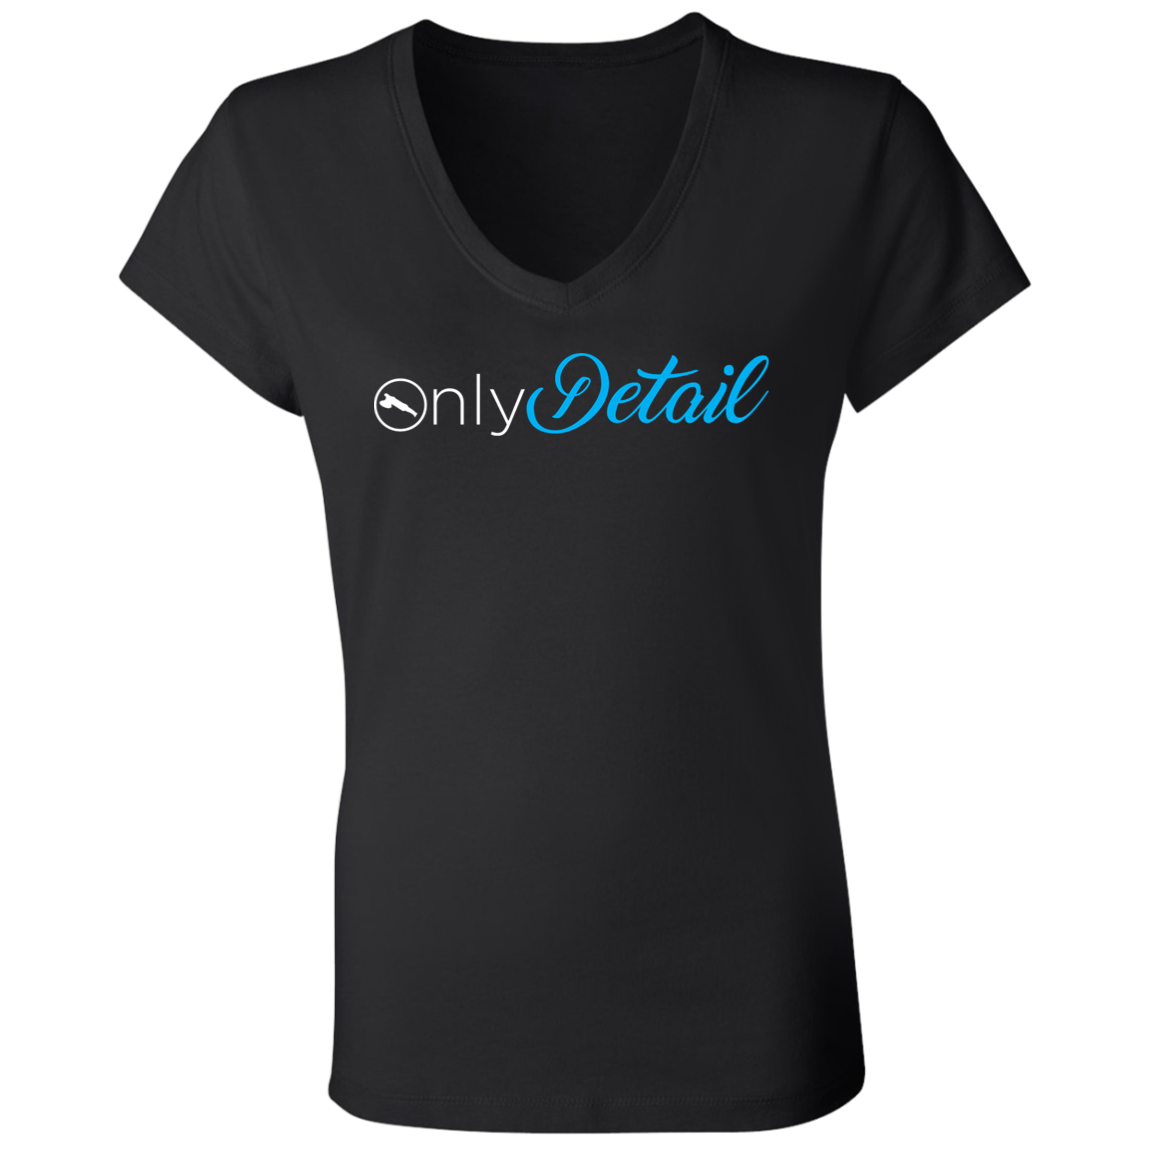 OnlyDetail Ladies' Jersey V-Neck T-Shirt